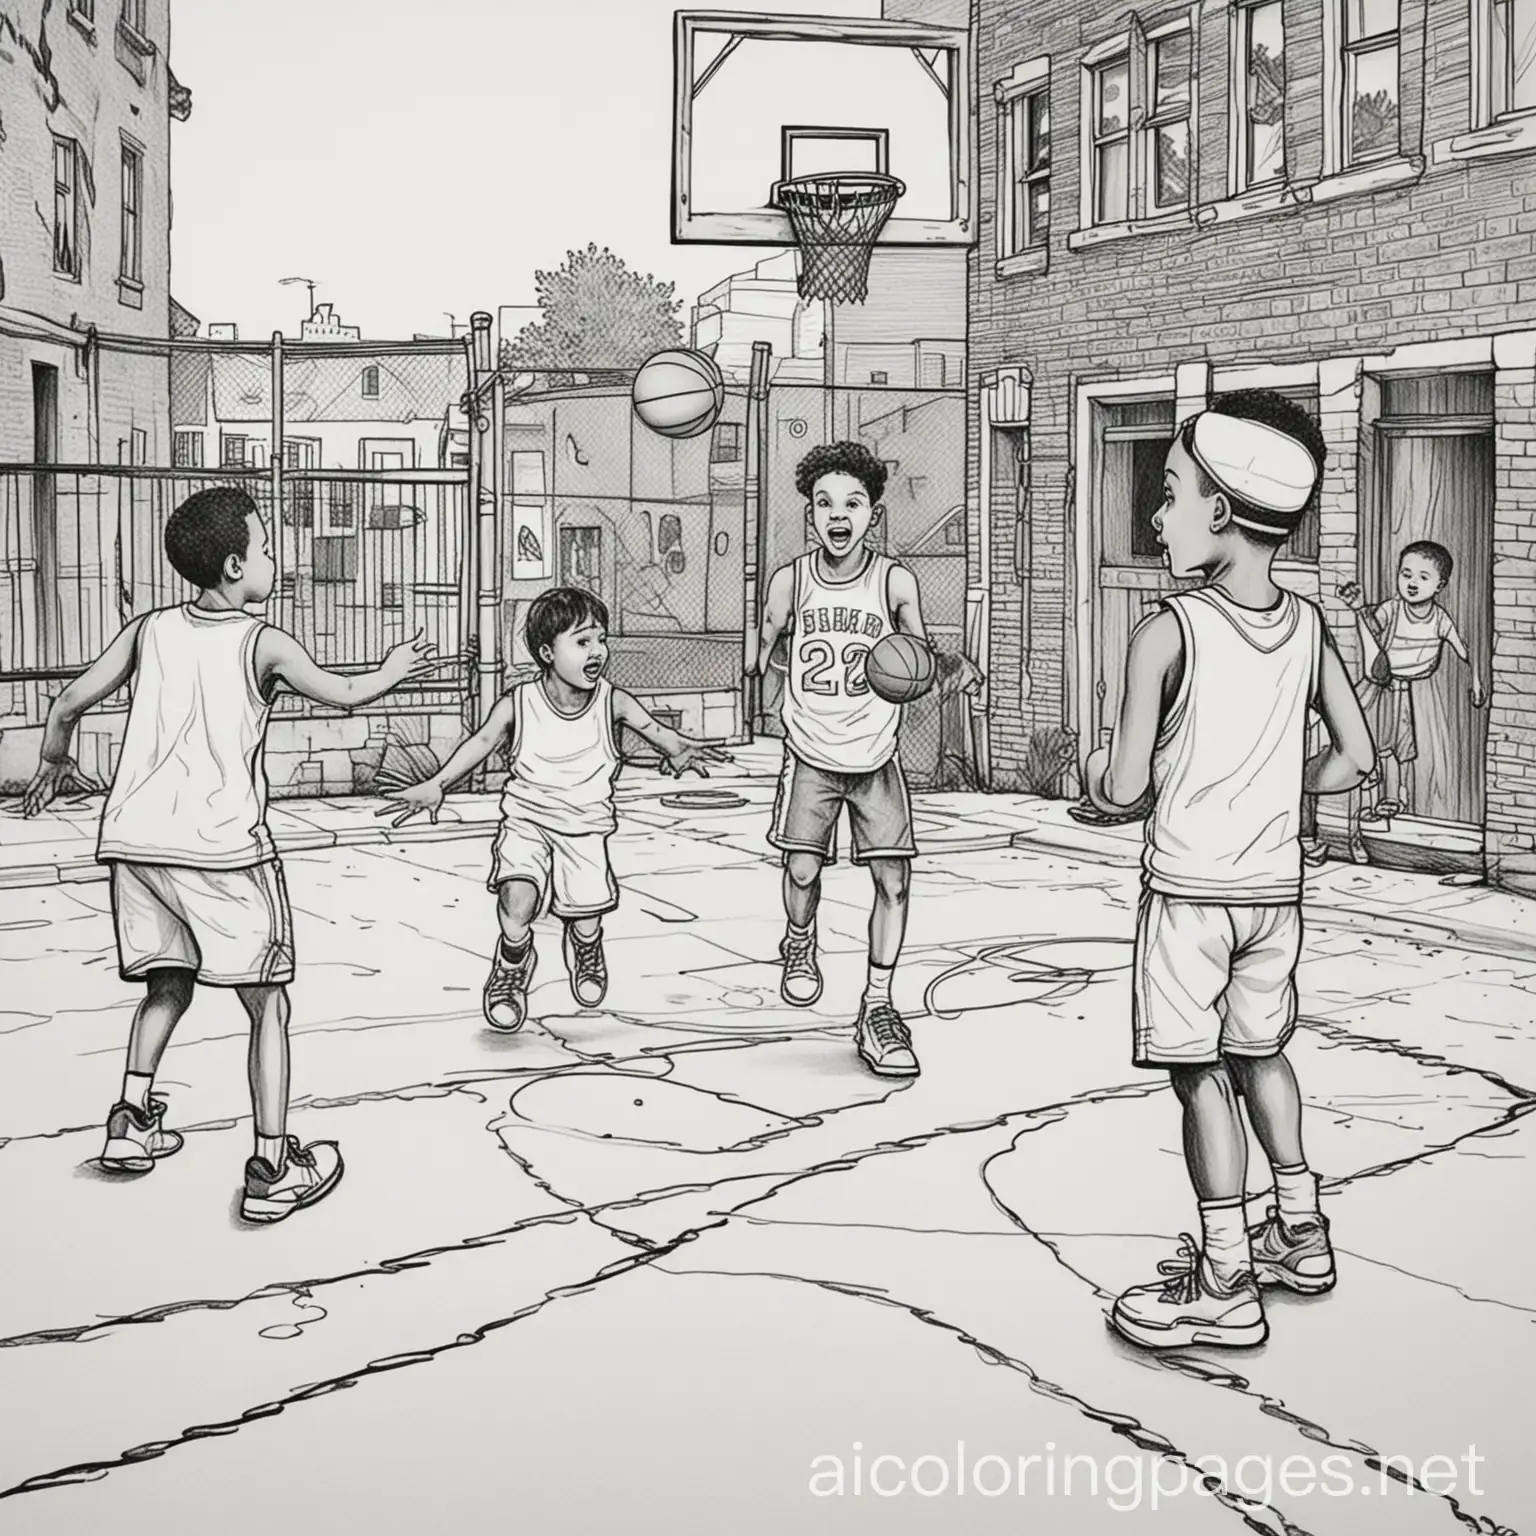  A group of six children playing a spirited basketball game on a basketball court in a Boston ghetto, depicting a humorous contest between teams with eccentric players" - Adult Coloring Page, black and white, line art, white background, Simplicity, Ample White Space, Coloring Page, black and white, line art, white background, Simplicity, Ample White Space. The coloring page's background is plain white to simplify coloring within the lines for young children. The outlines of all subjects are clear and distinguishable, making it easy for kids to color without too much difficulty.